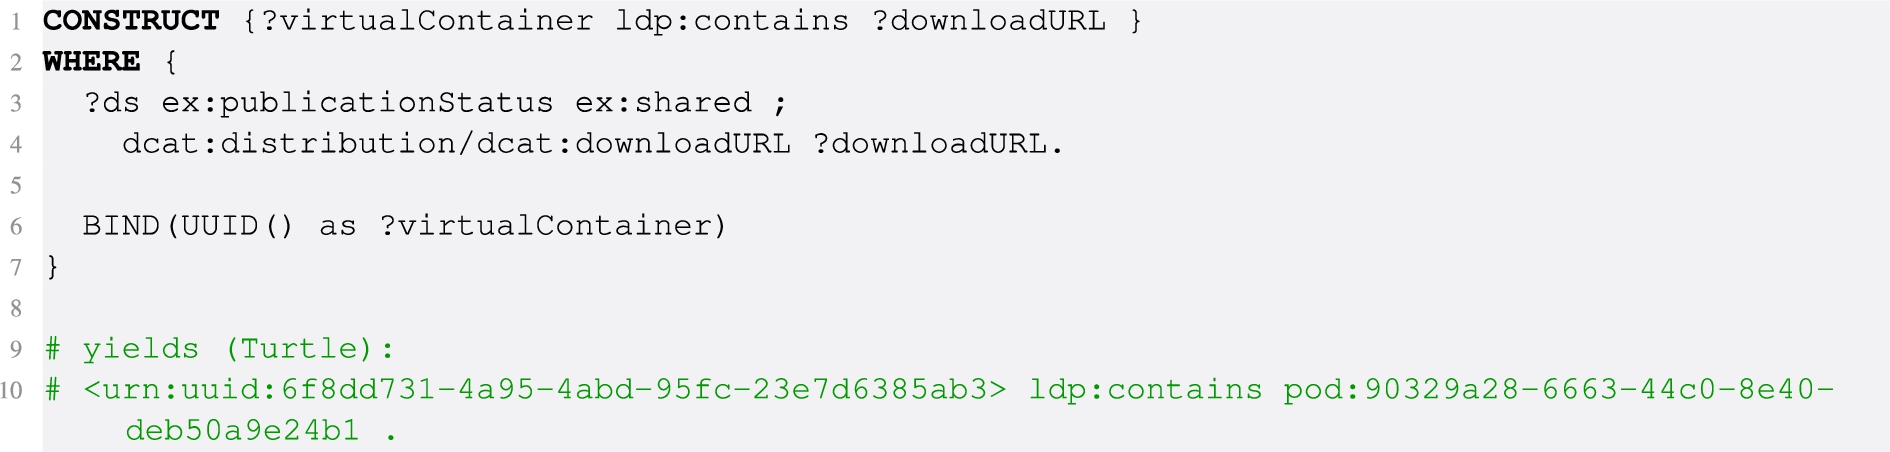 SPARQL query to filter project datasets that are ‘shared’ and return their distributions as virtual containers, to be used by LDP-compatible tooling